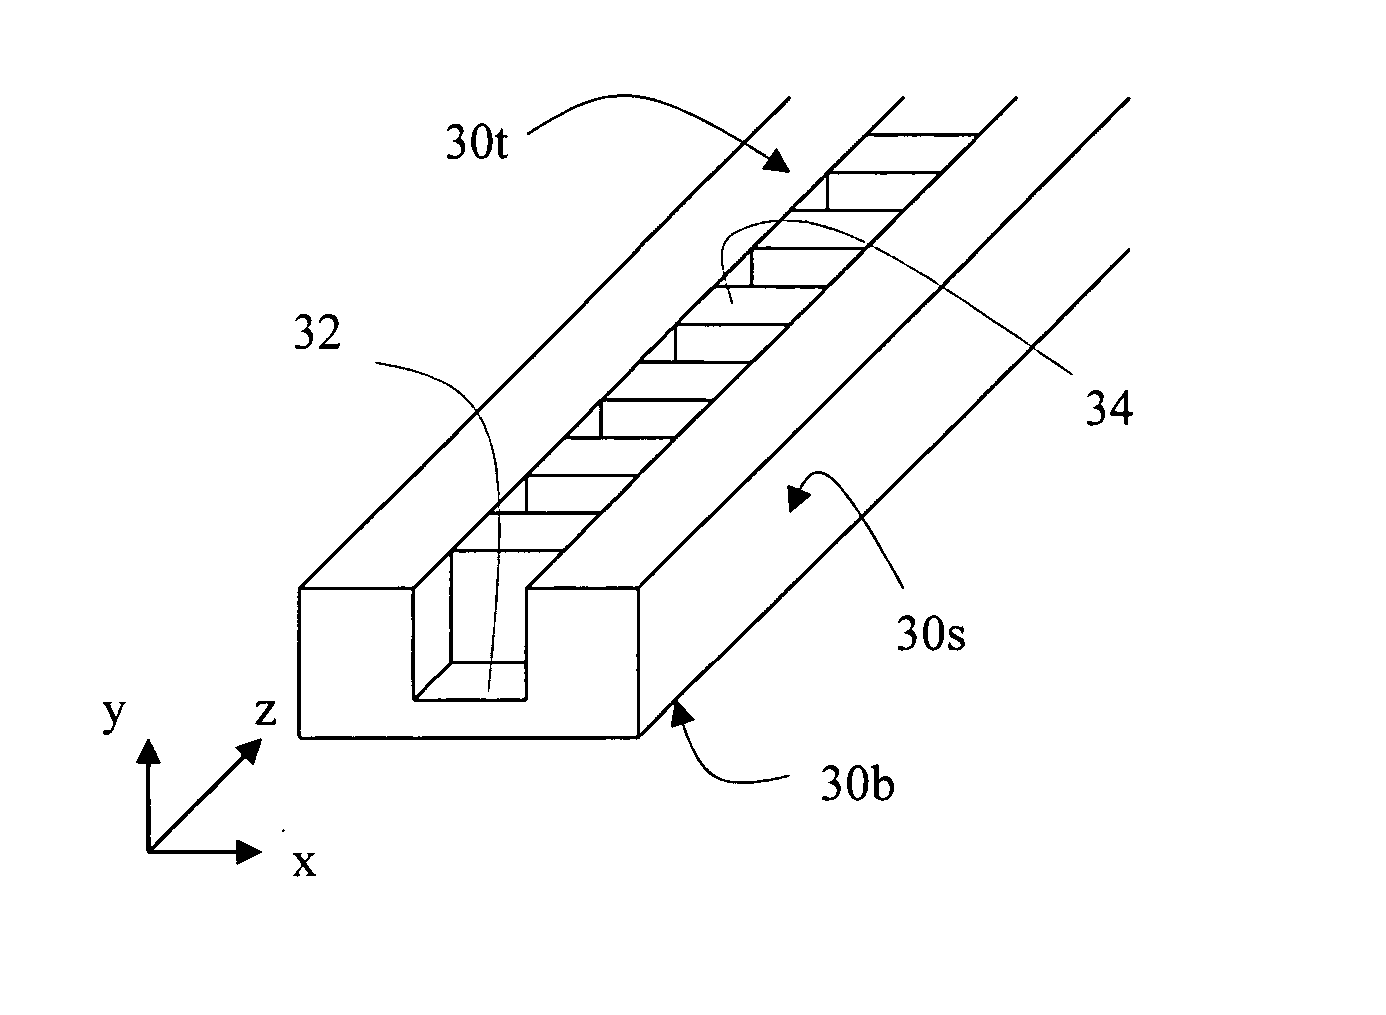 Slow-wave structure for ridge waveguide